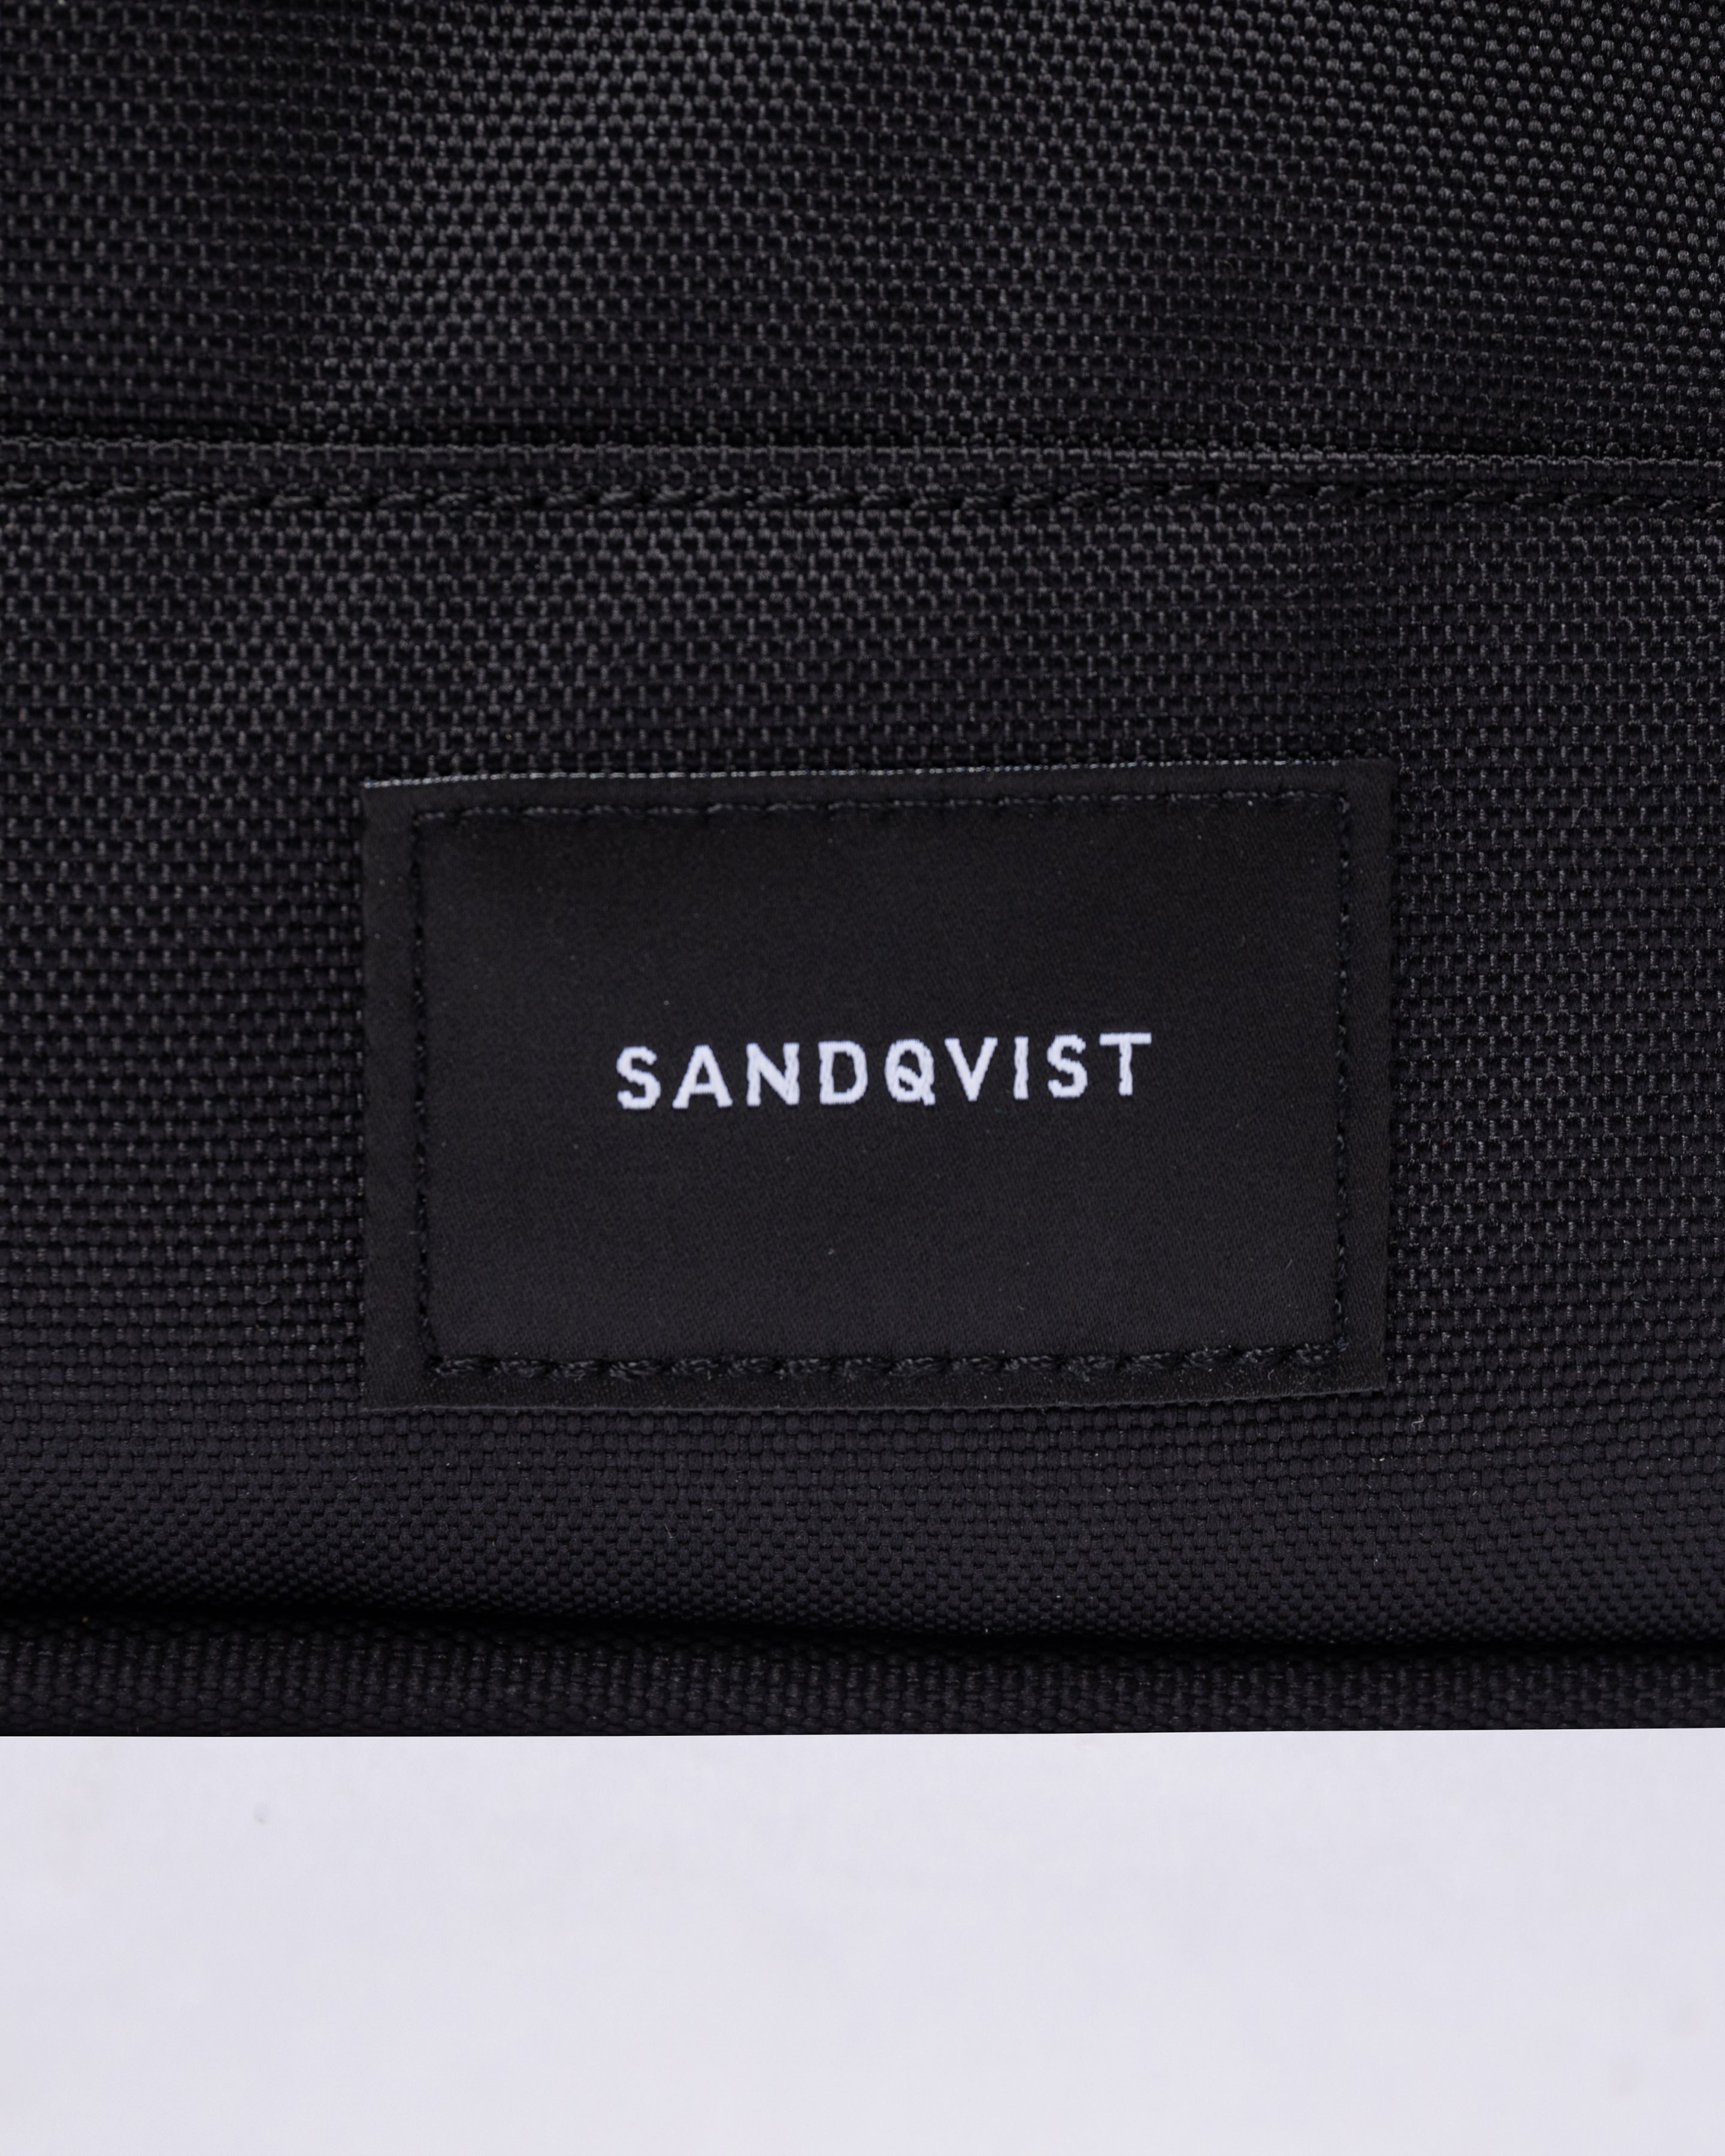 Sandqvist Olof Crossbody Bag in Black SQA2174 | Shop from eightywingold an official brand partner for Sandqvist Canada and US.